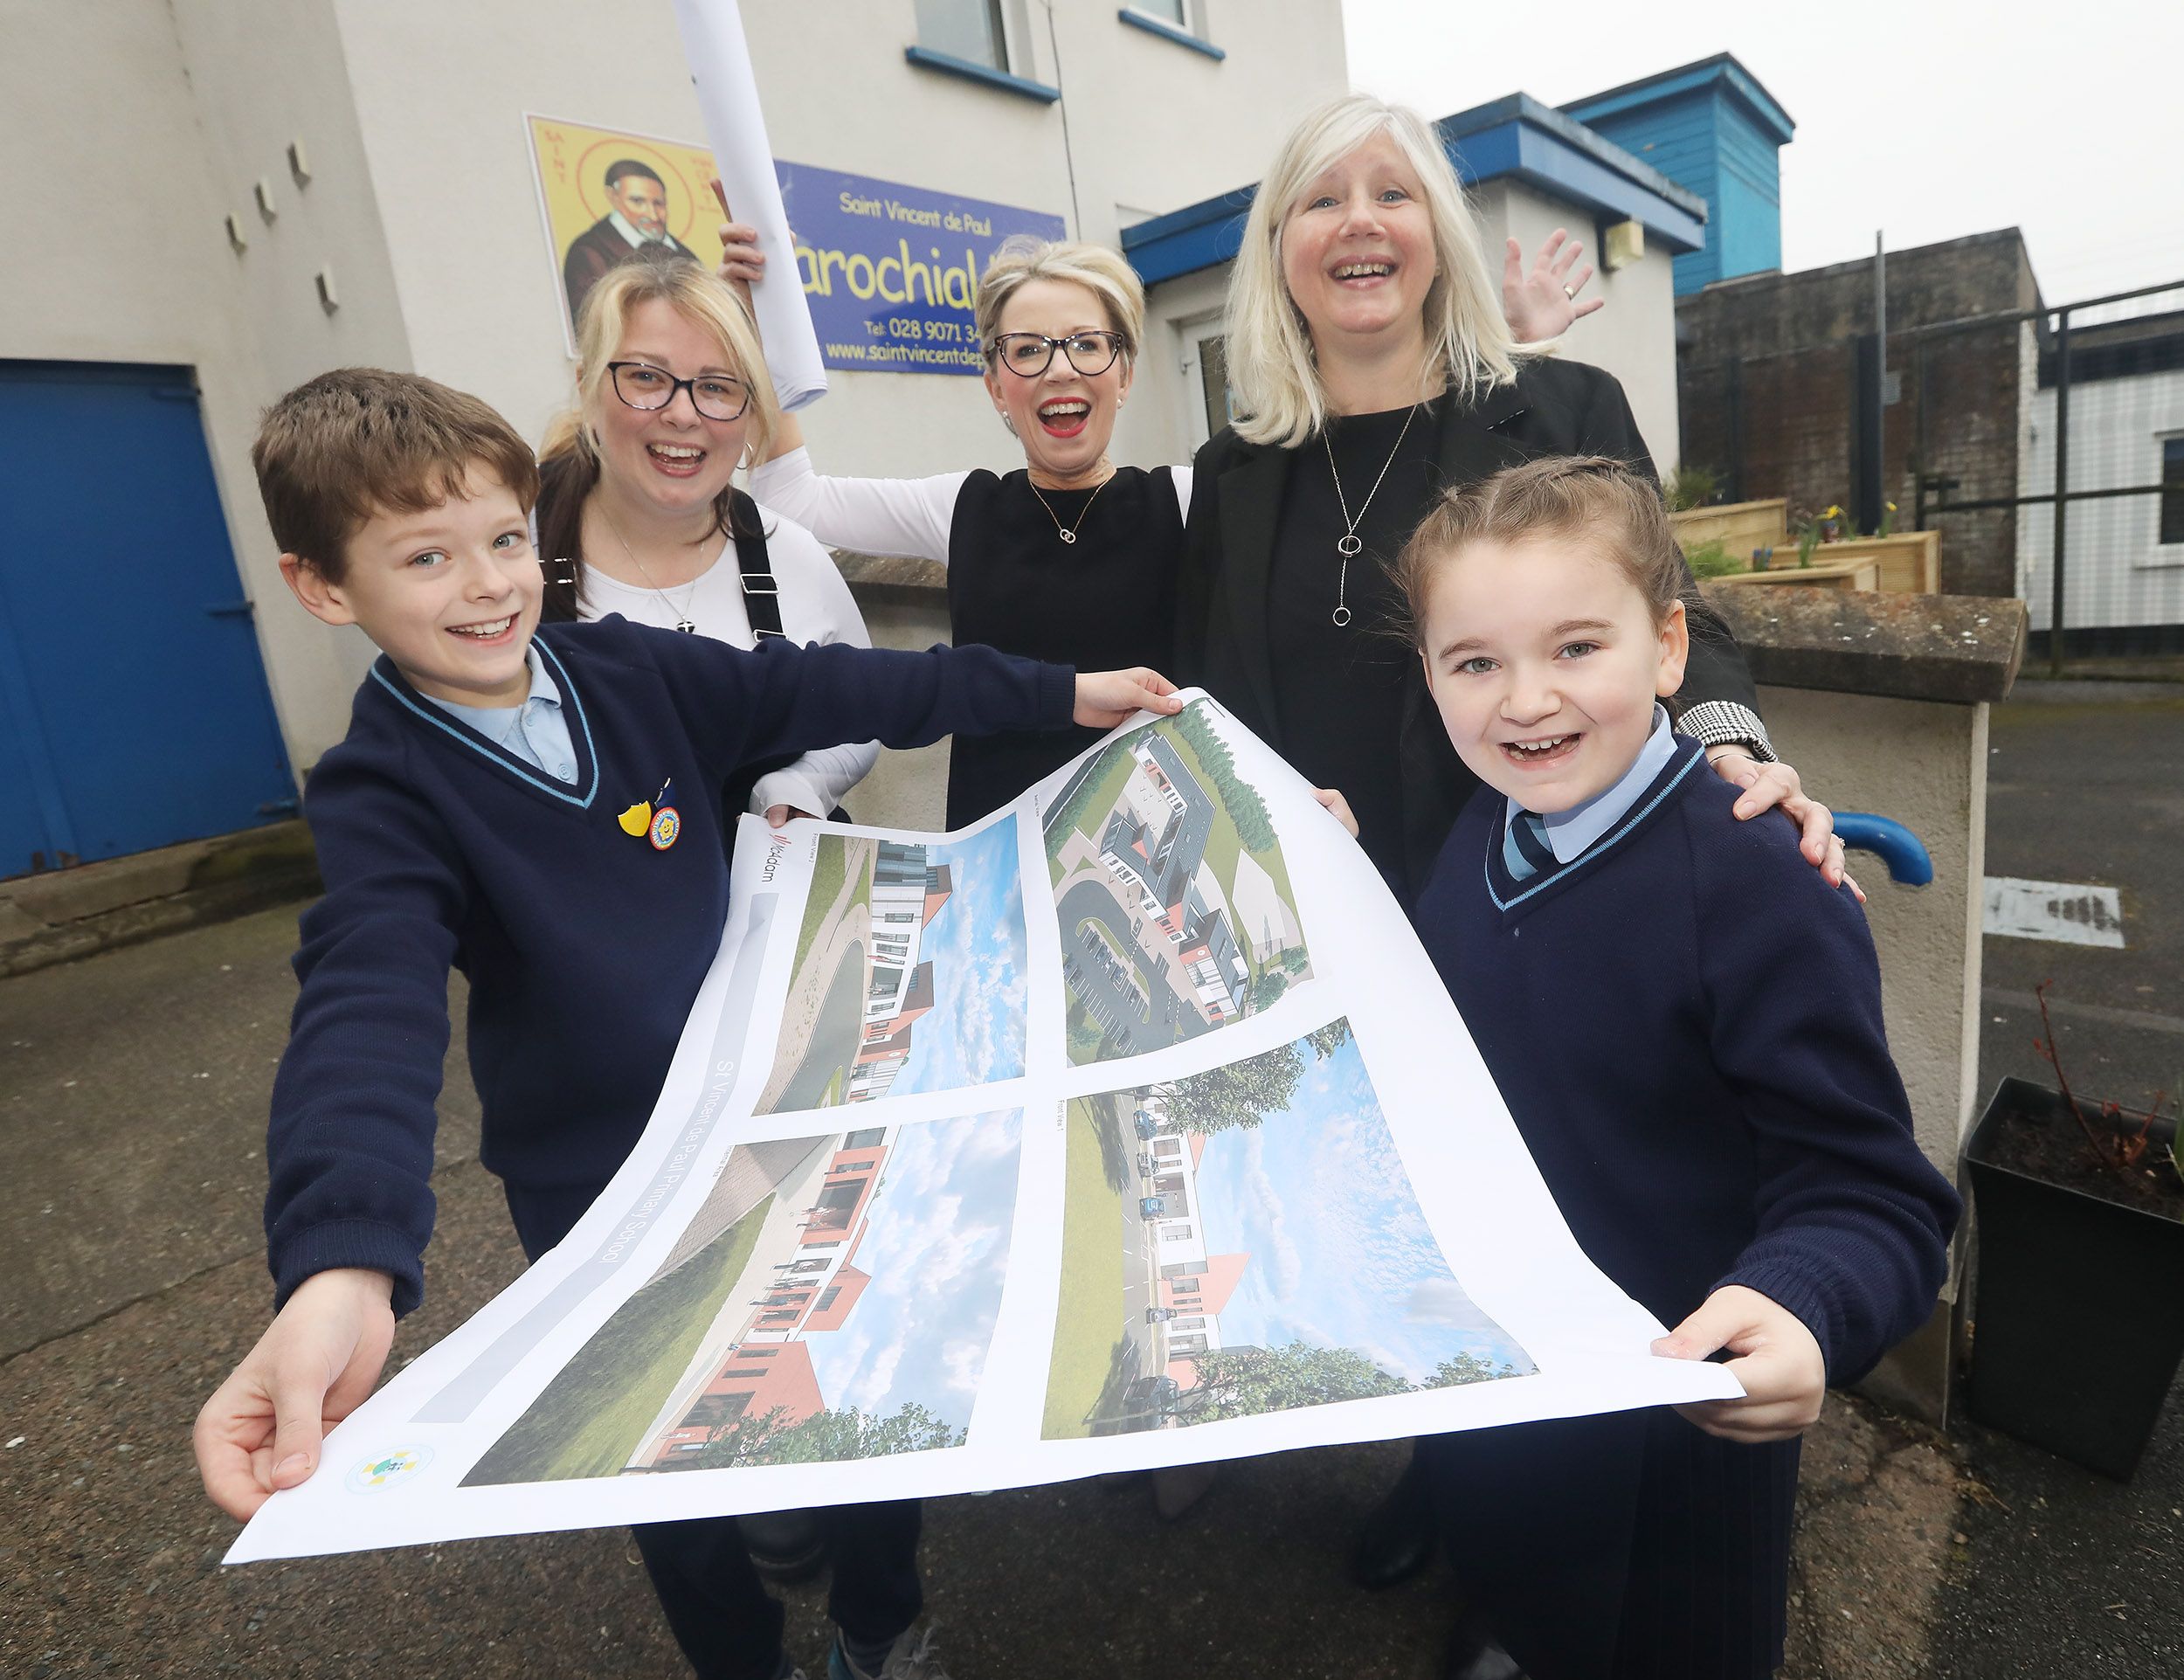 NEW SCHOOL PLANS: Joseph Smith (P7), Leigh Smith (Board of Governors), Bronagh McVeigh (Principal), Christine Burns (Board of Governors) and Melissa Hughes (P5) 